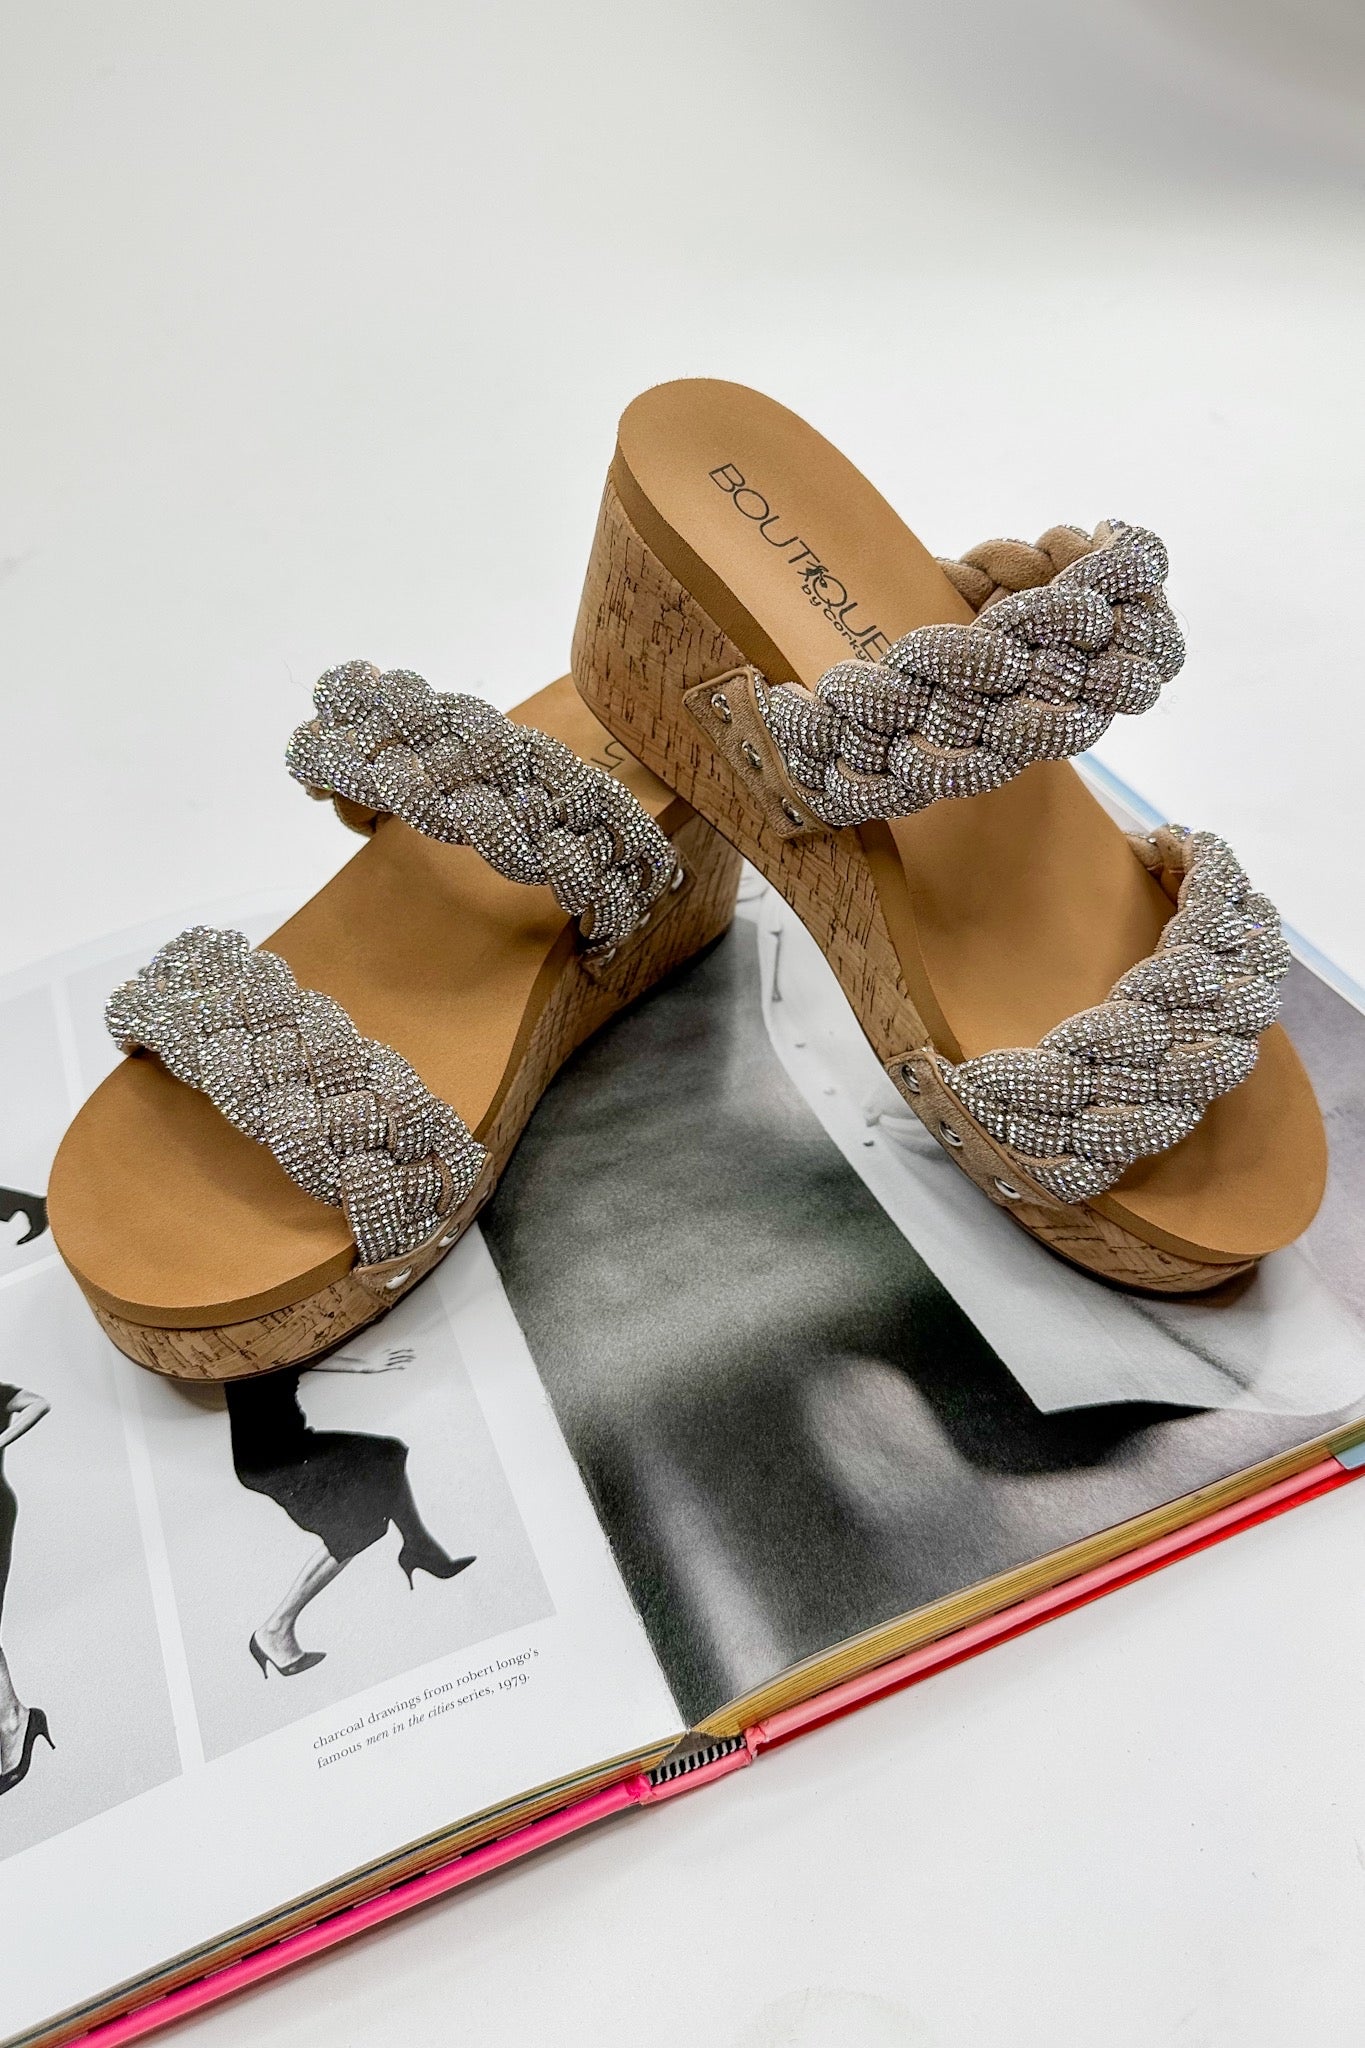 The Mystique Braided Clear Rhinestone Wedges by Corkys